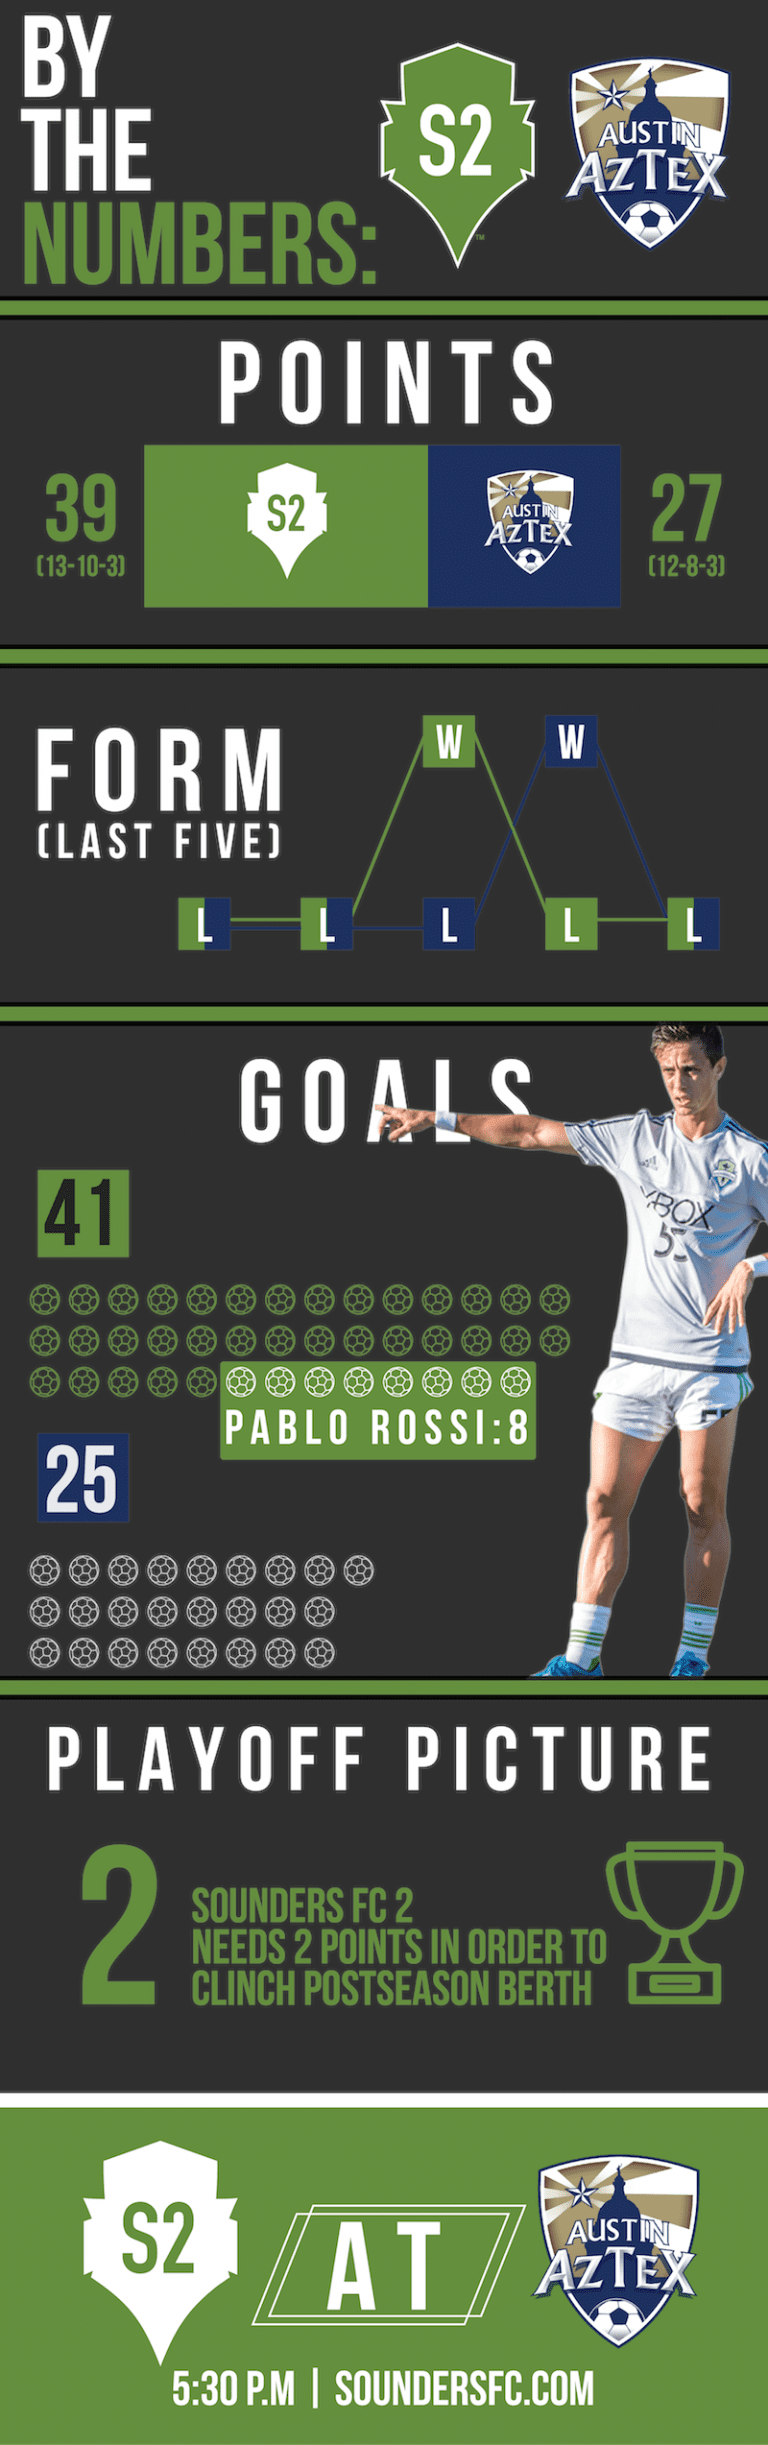 By the Numbers: S2 at Austin Aztex -